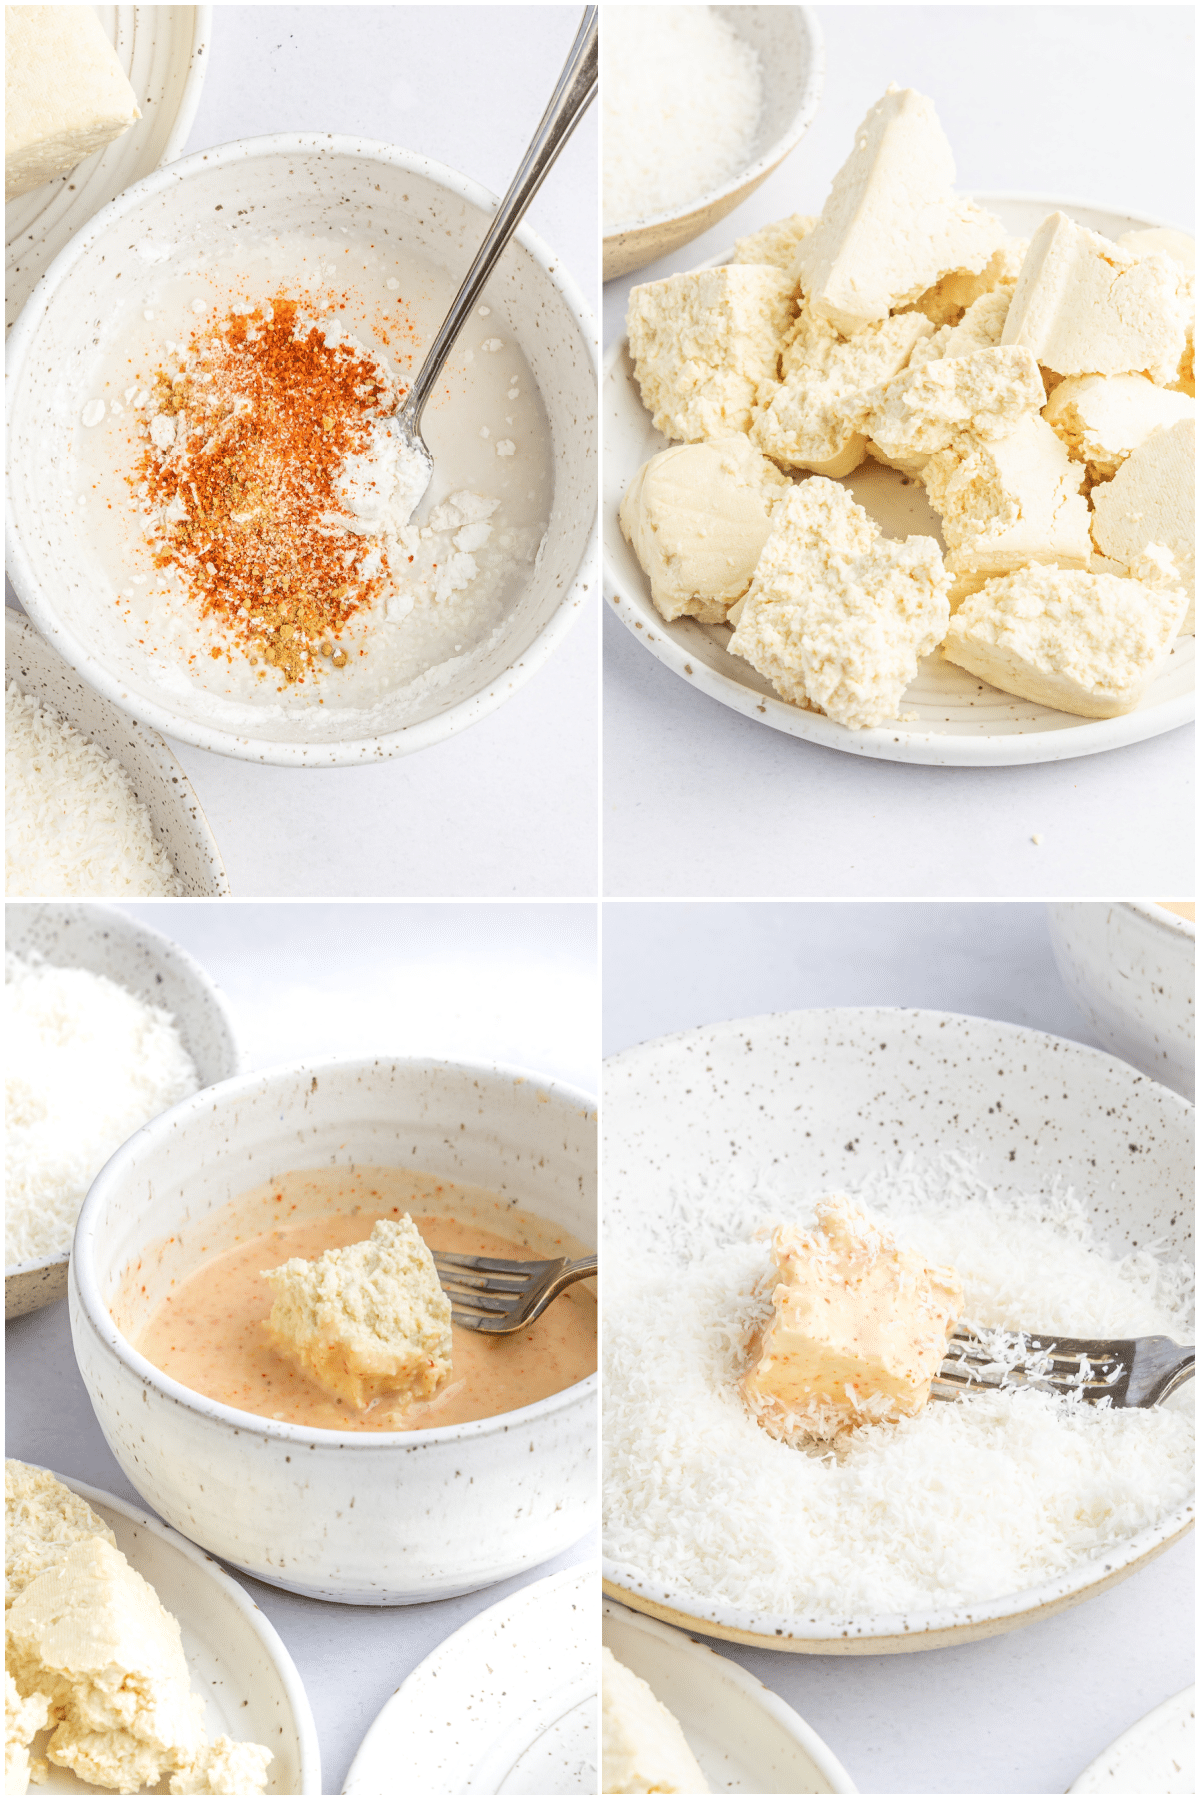 A four photo collage showing how to make crispy coconut tofu: make one bowl with wet batter, rip tofu into rough chunks, dip tofu chunks into wet batter, then dredge battered tofu through shredded coconut.